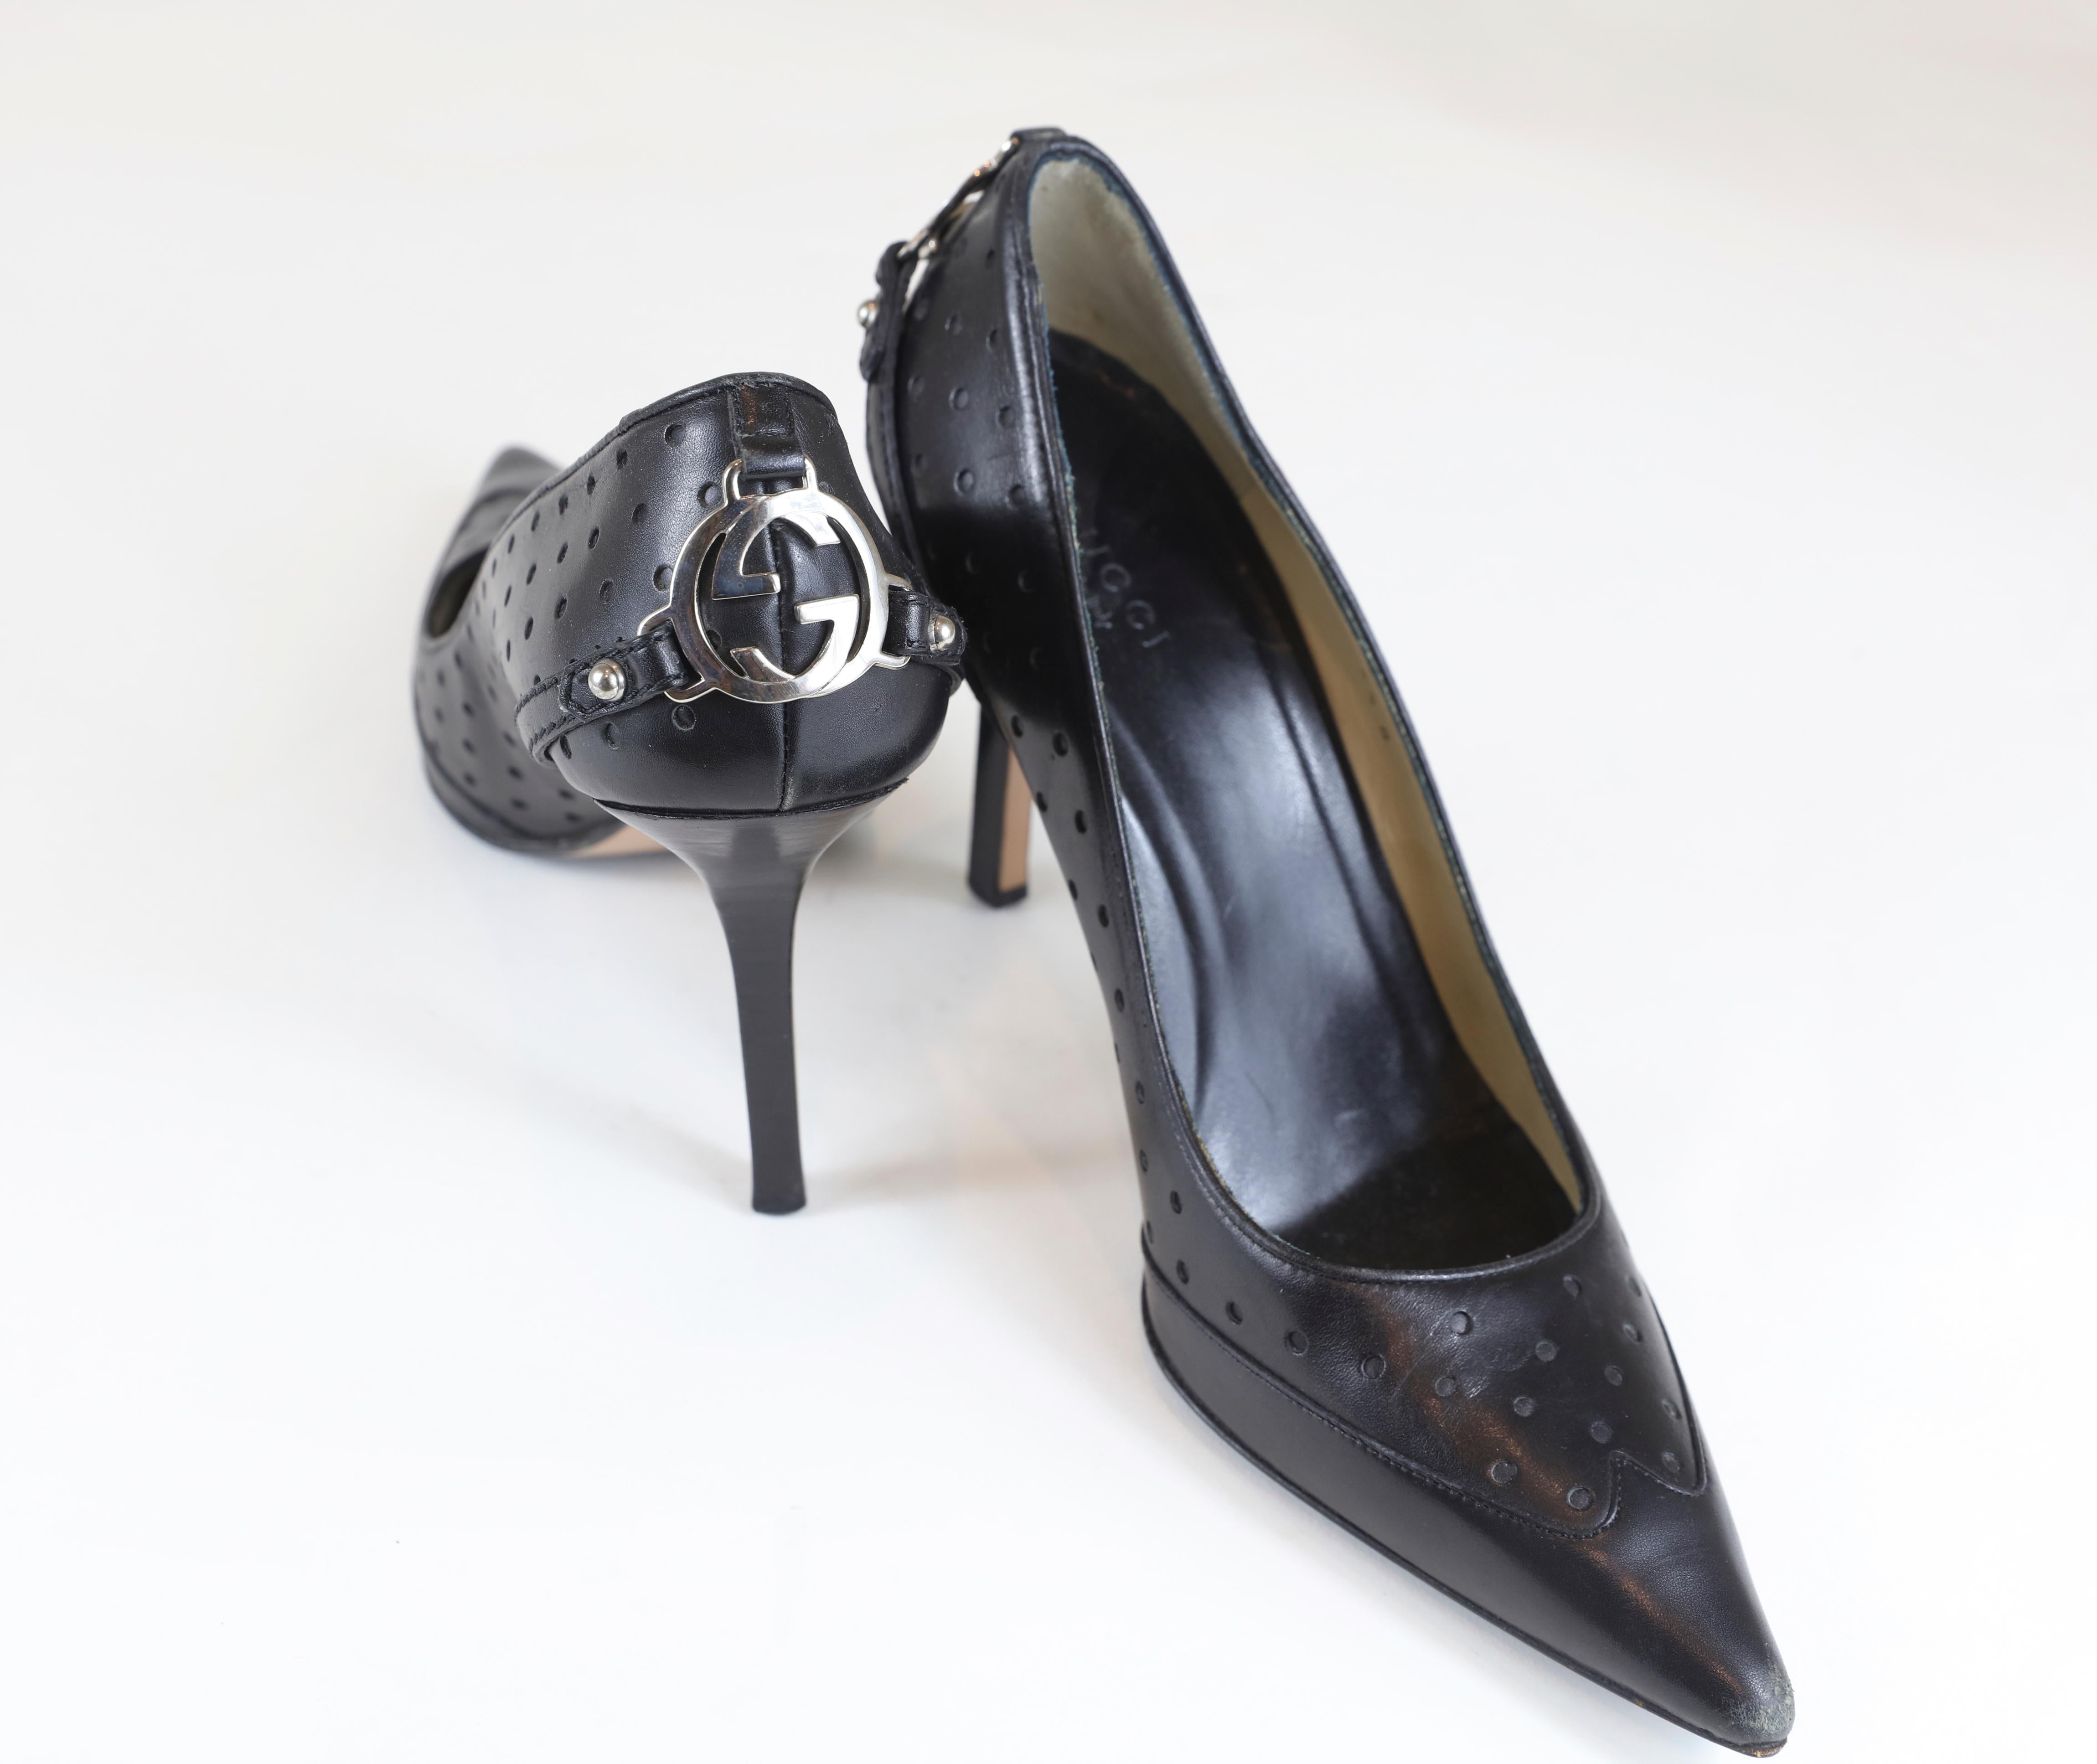 Classy pair of black pointed heels, perfect for work or occasion 